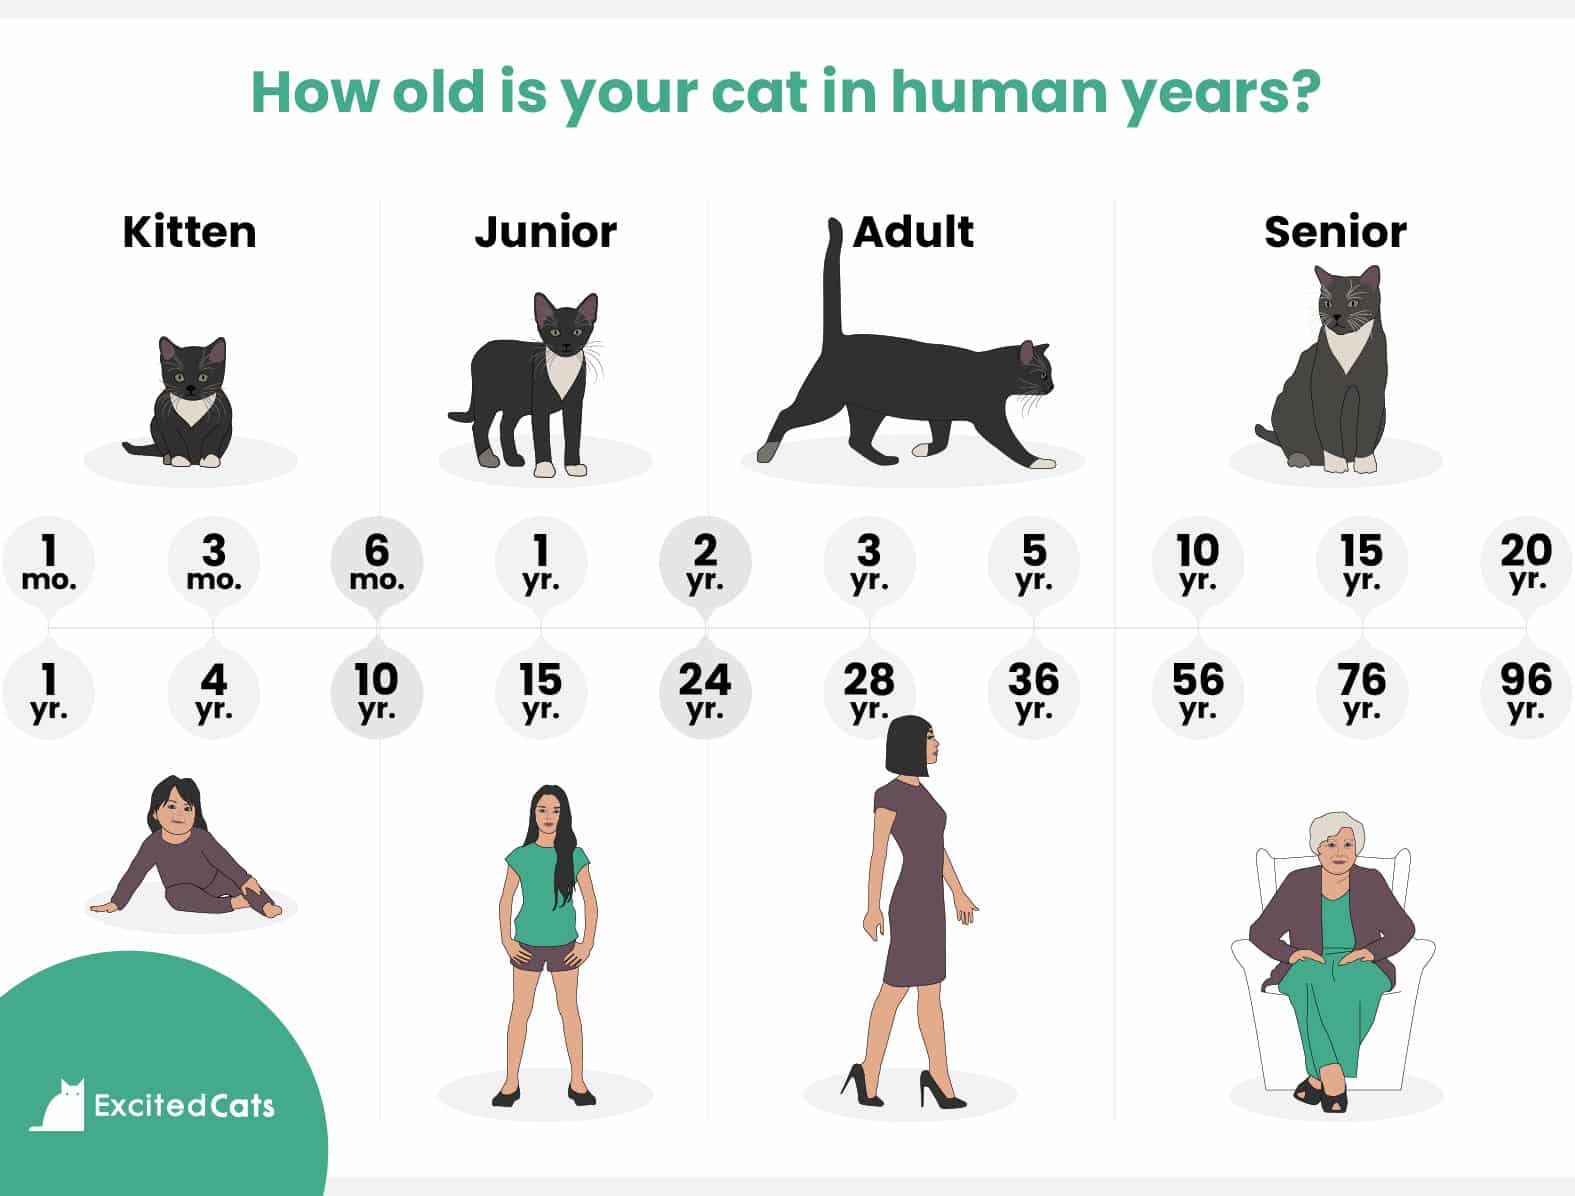 how old is your cat in human years?